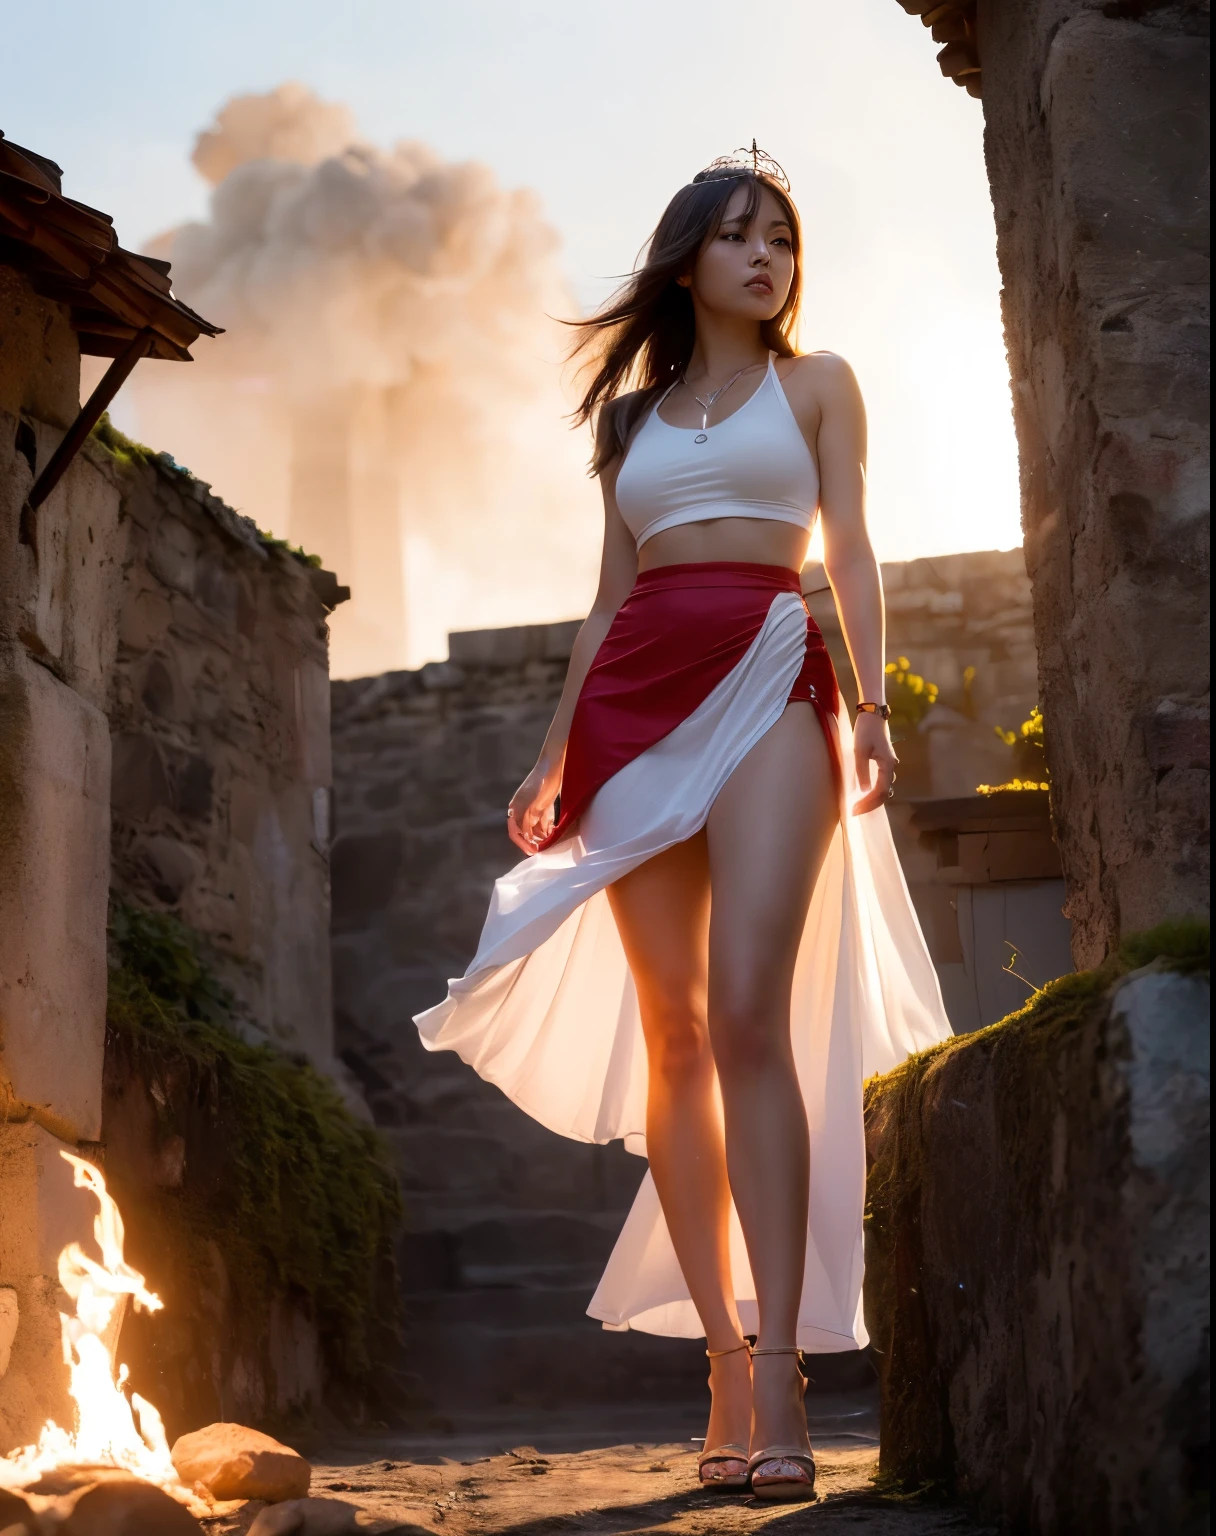 （Full body photo，Full-body display），((Great composition，Medieval ancient battlefield，A woman wearing a loose white gauze skirt，Goddess of Fire，Behind her is a stone castle.，Shooting from below，Rich scene details，Smoke was floating everywhere，You can see a tall tower in the distance，The flames light up the sky red))，(Age 25，A solemn and stern expression，Protruding nipples),((Anatomically correct，8k, Very detailed, UHigh resolution, masterpiece, Very detailed, Attention to detail, high quality, Awards, 最high quality, High resolution, 1080p, High resolution, 4K, 8k, Accurate))